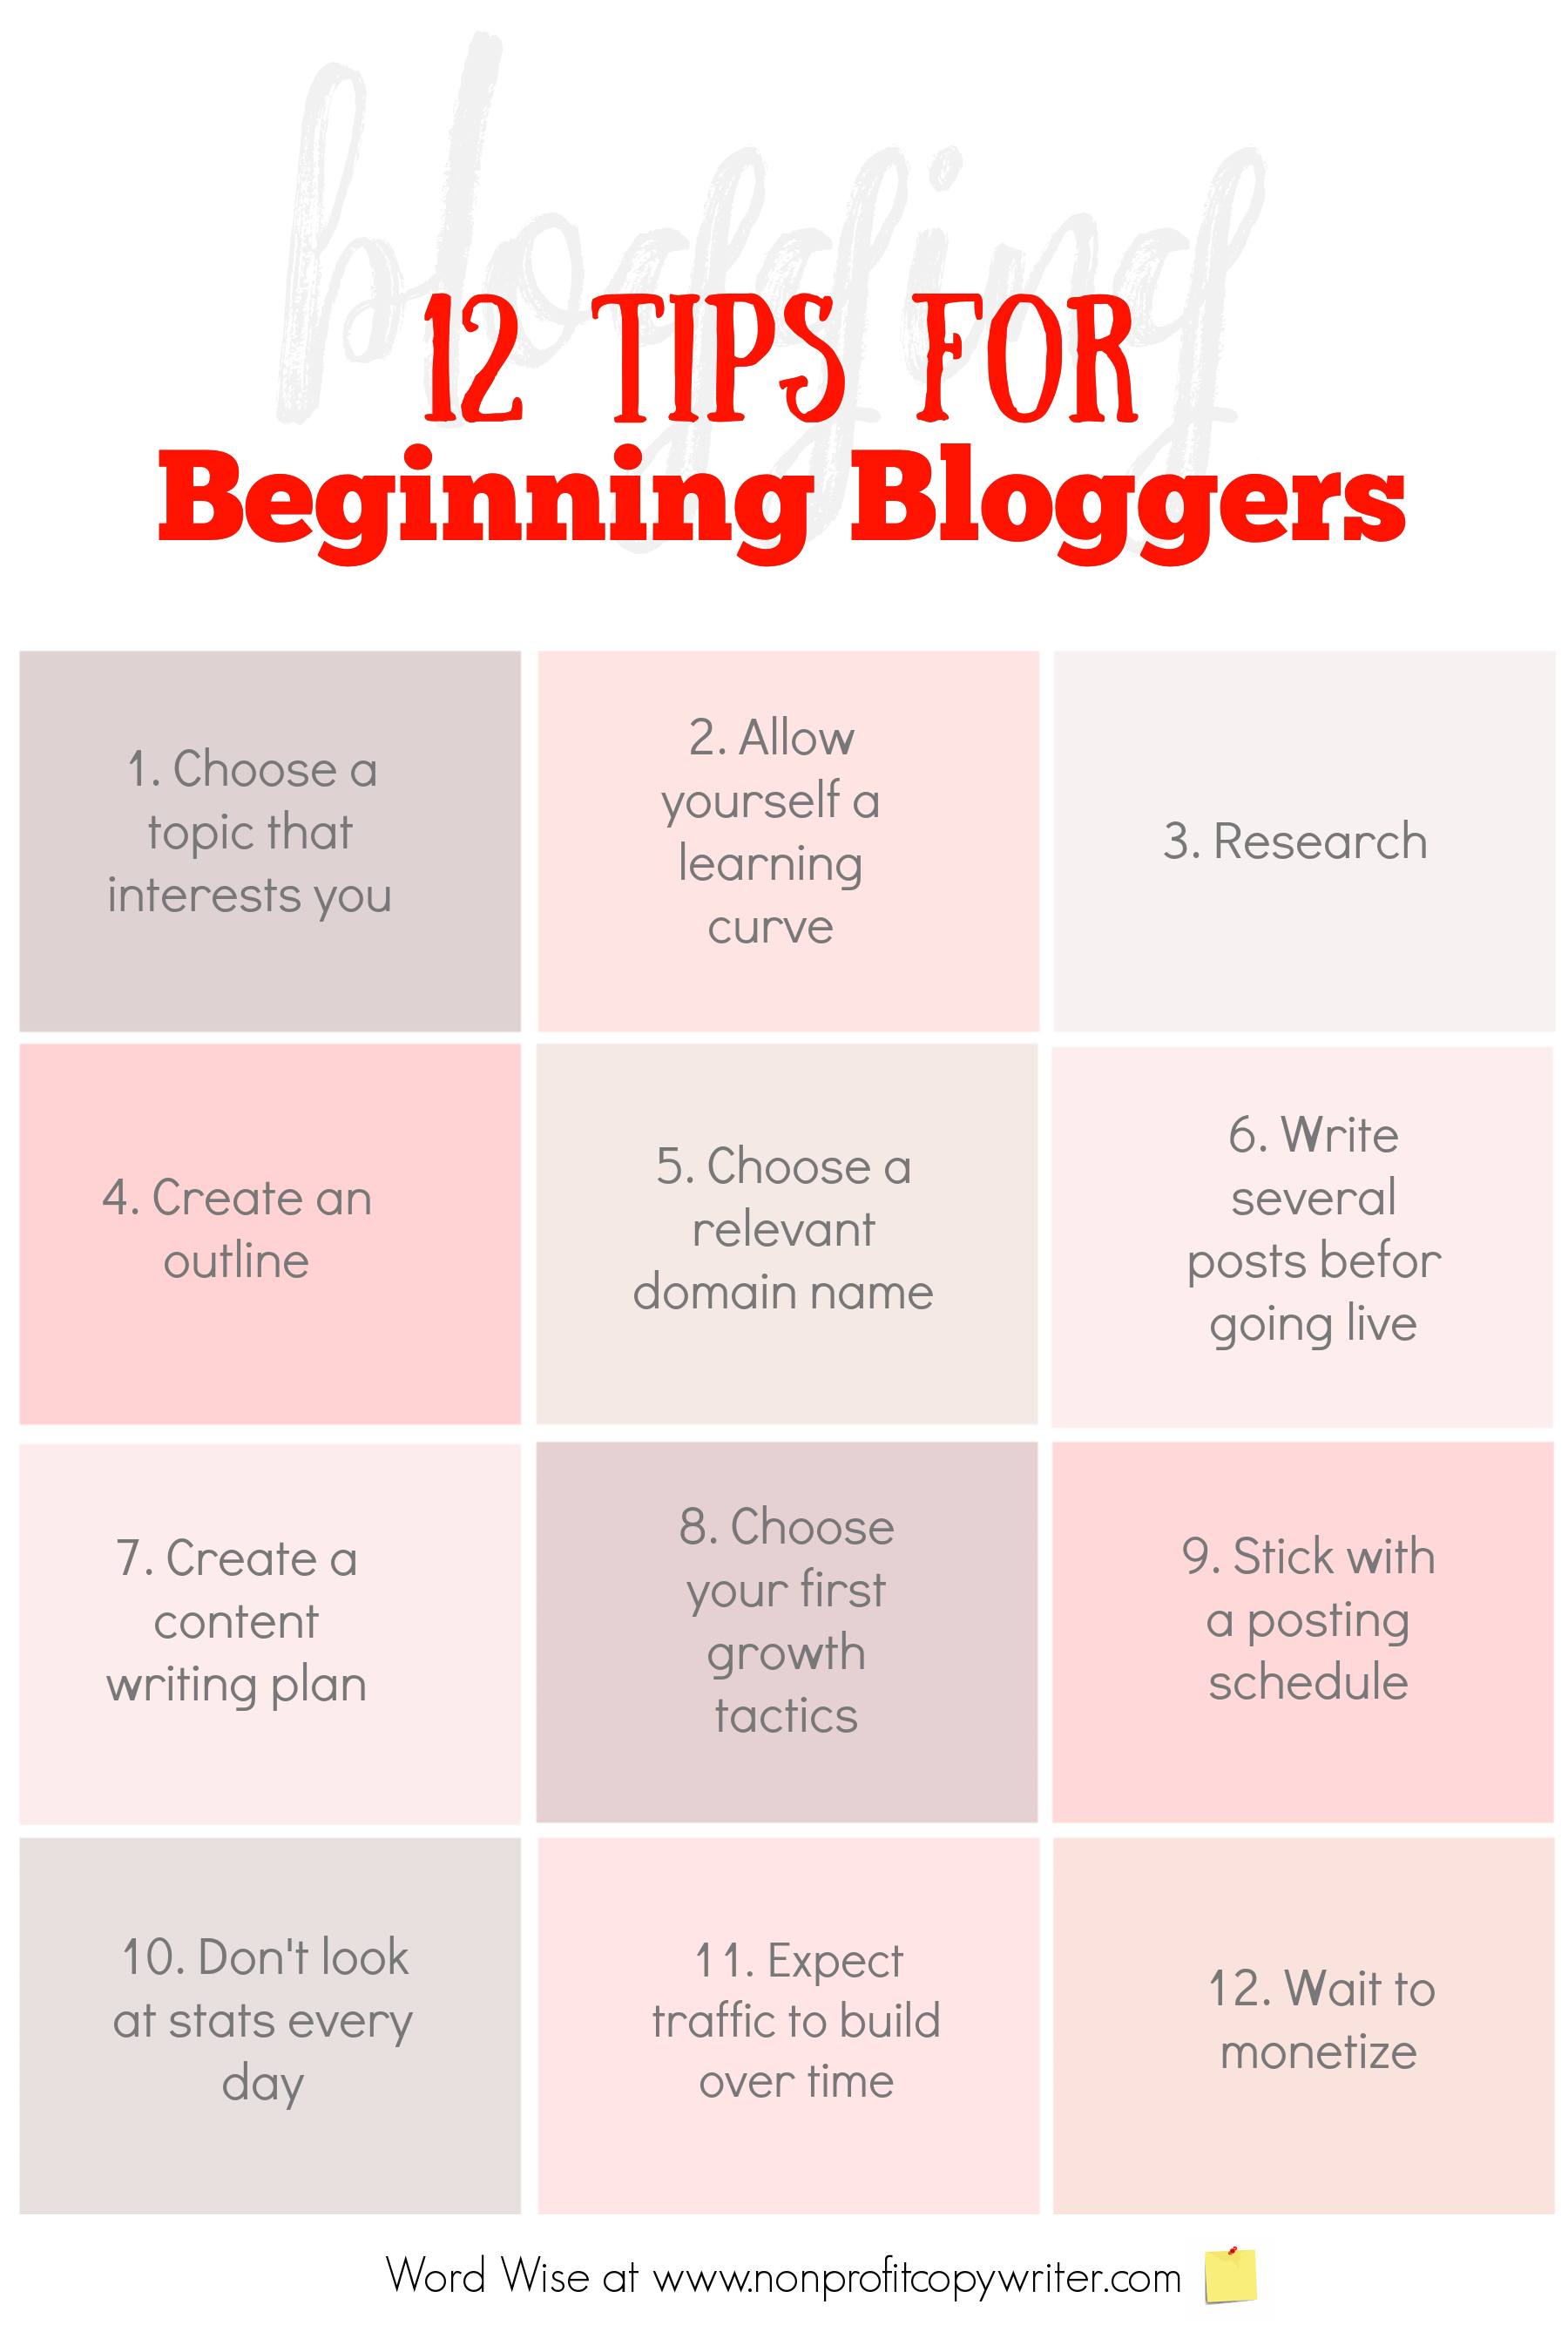 12 tips for beginning #bloggers with Word Wise at Nonprofit Copywriter #blogging #WritingTips